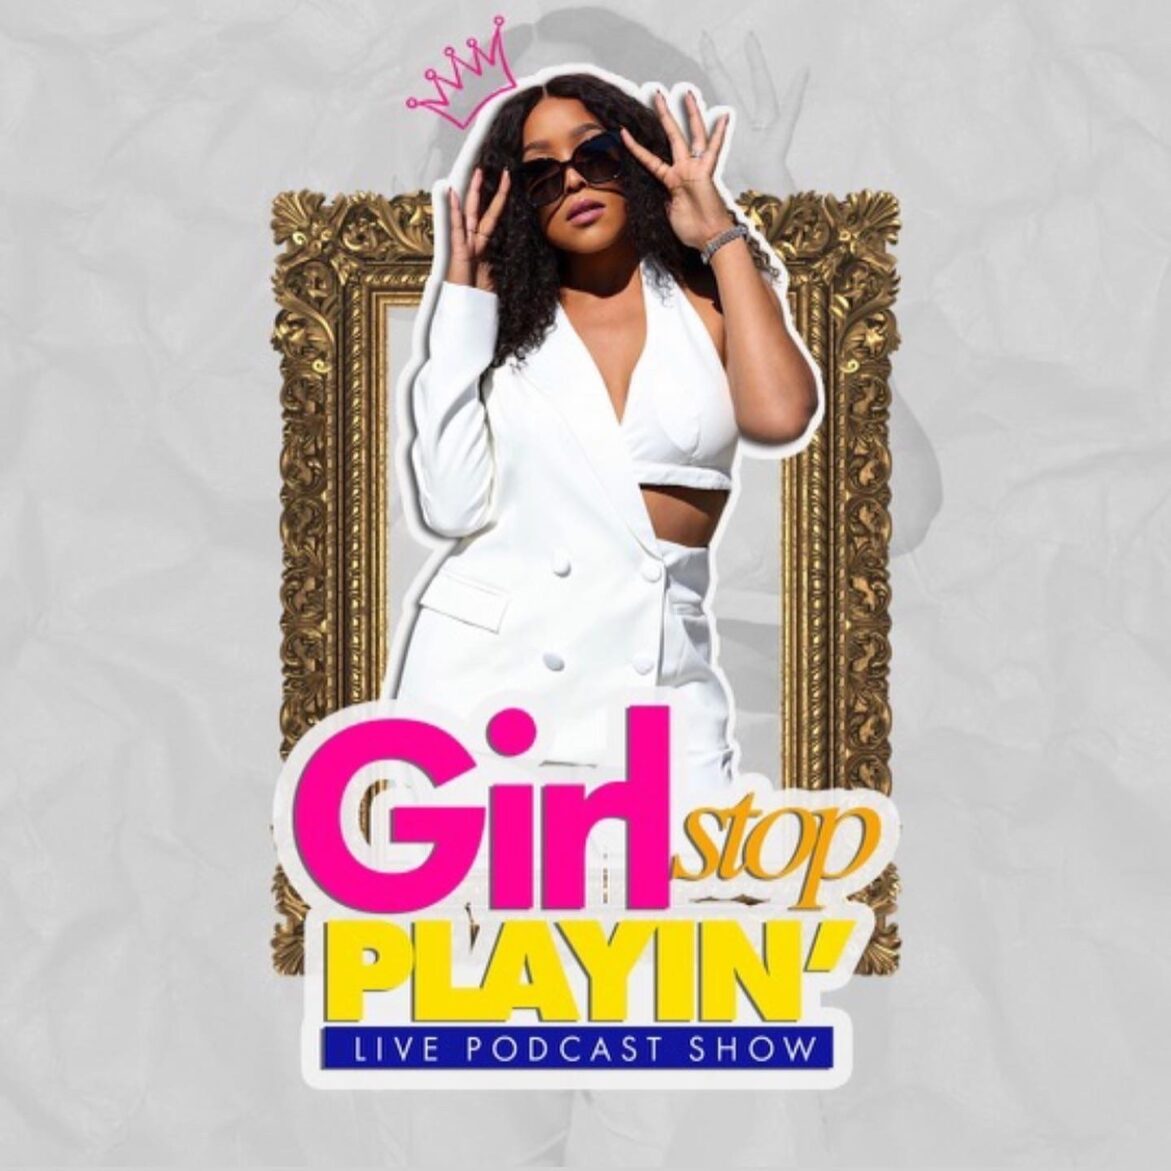 Black Podcasting - How to Make Six Figures from Groupon | Candace Holyfield | Girl Stop Playin'| Episode 63